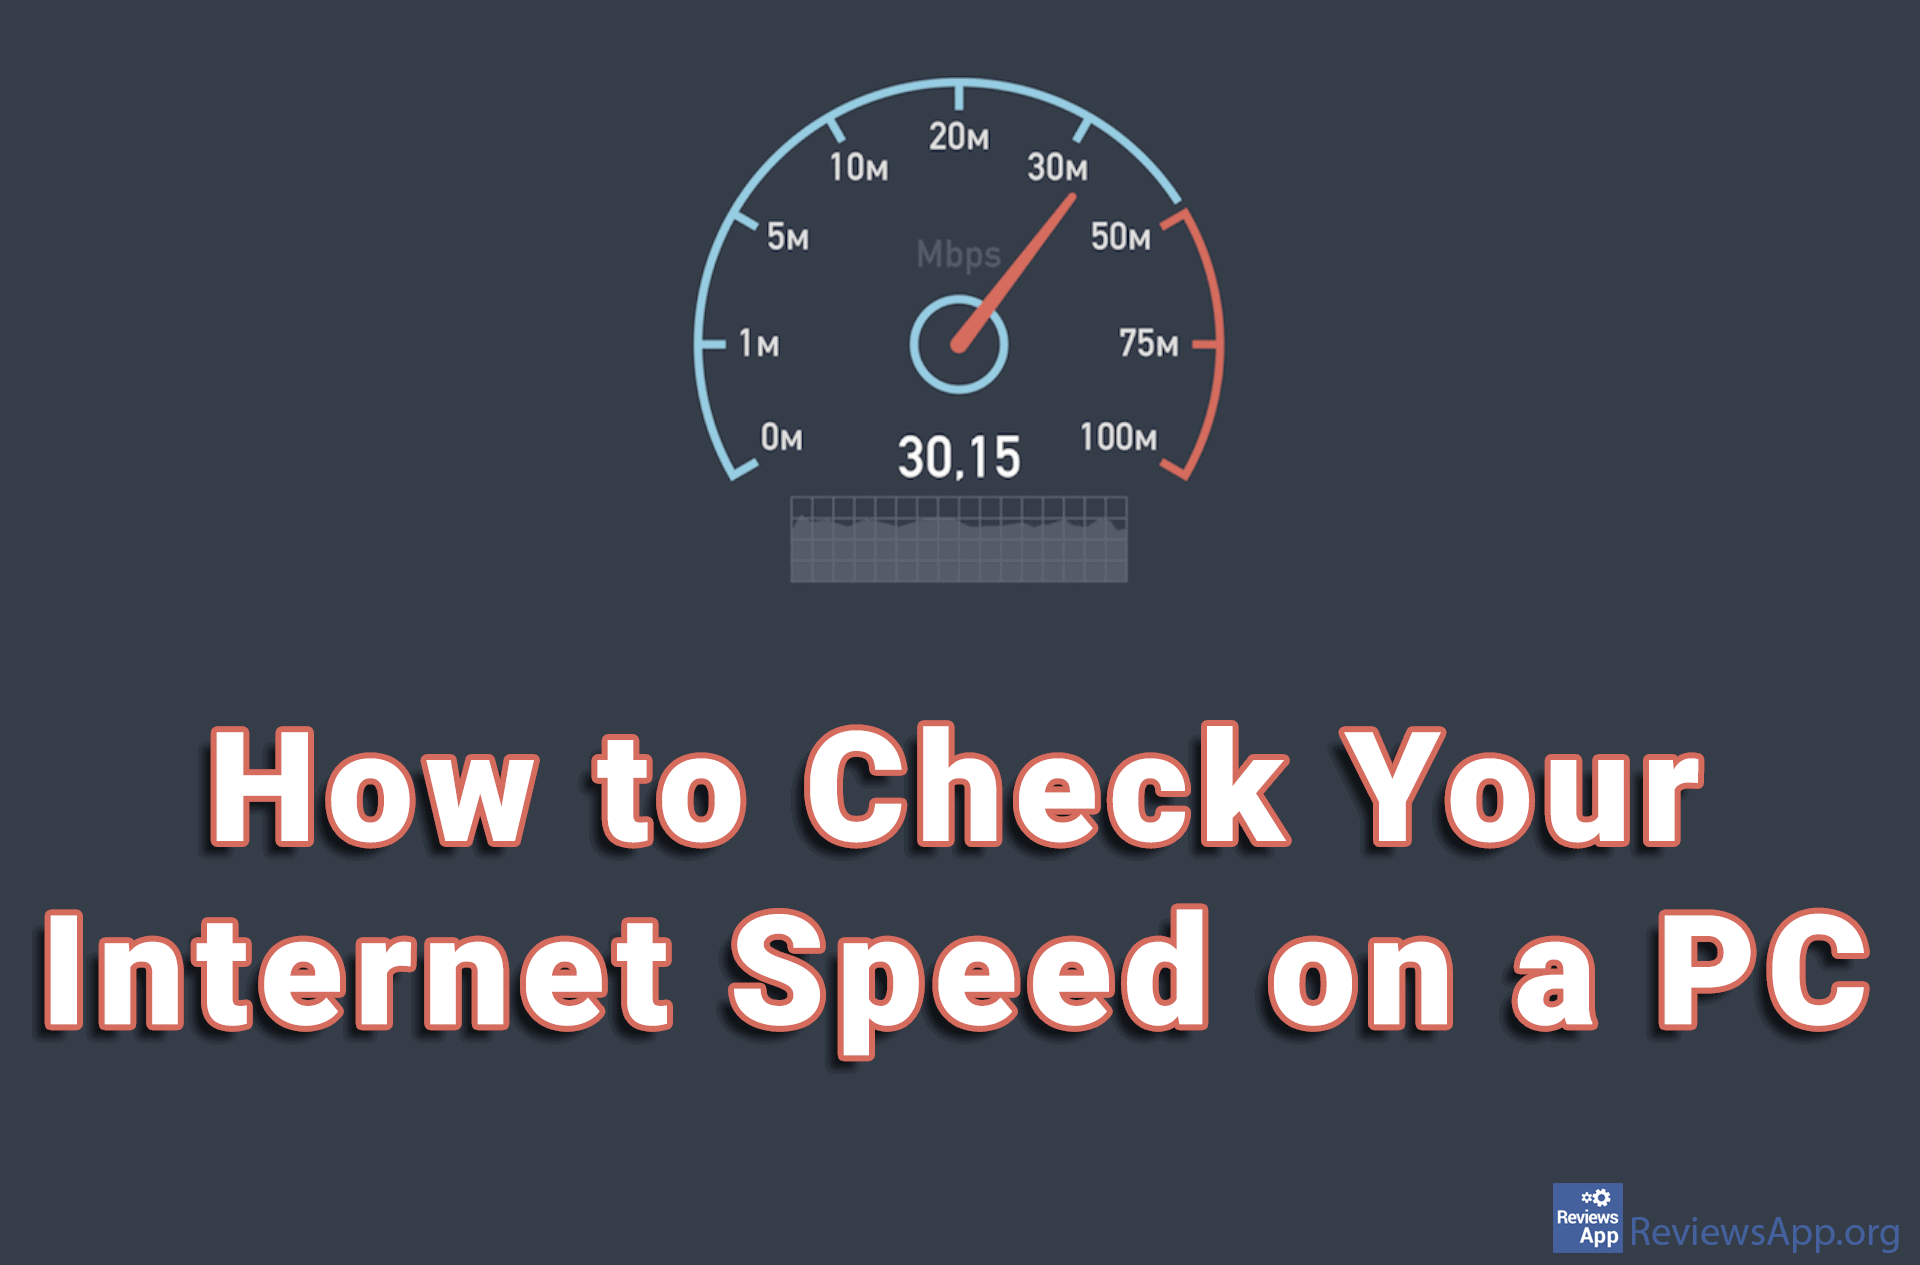 How to Check Your Internet Speed on a PC